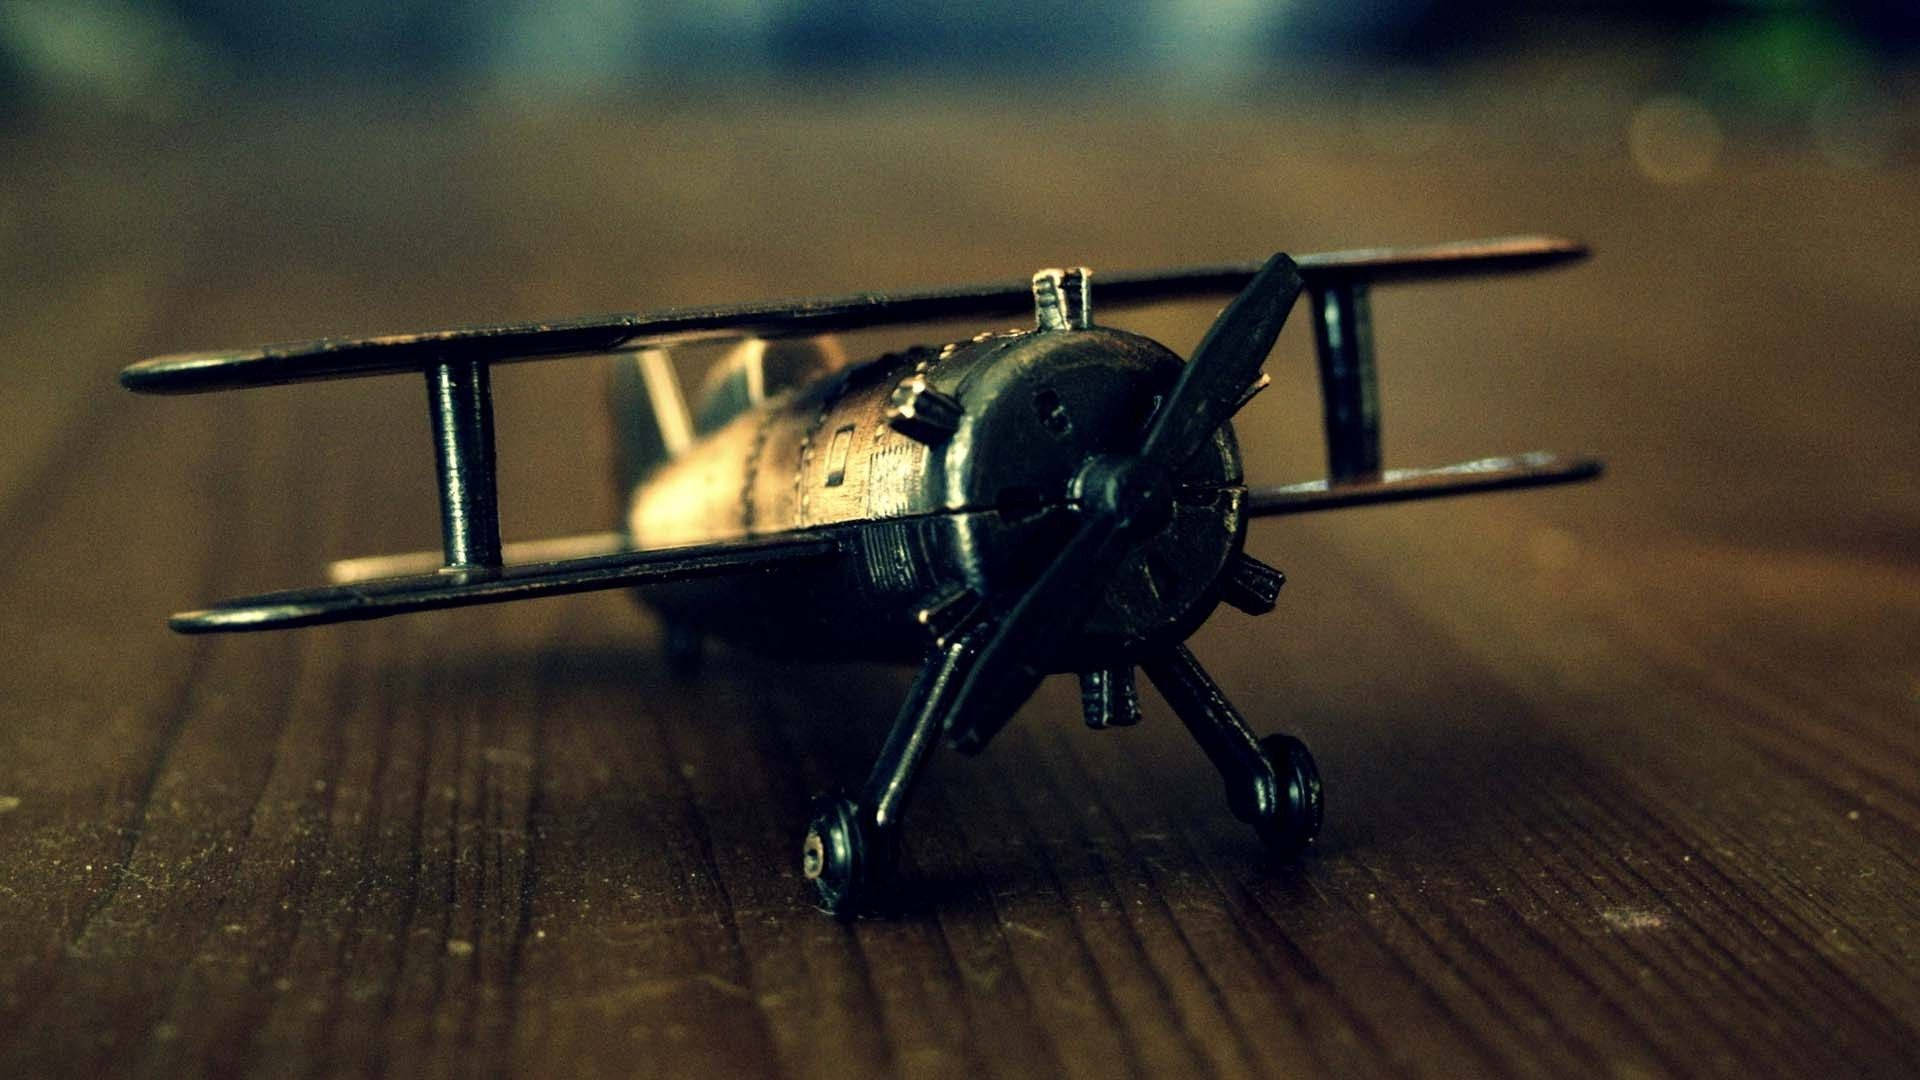 Classic Toy Airplane Background